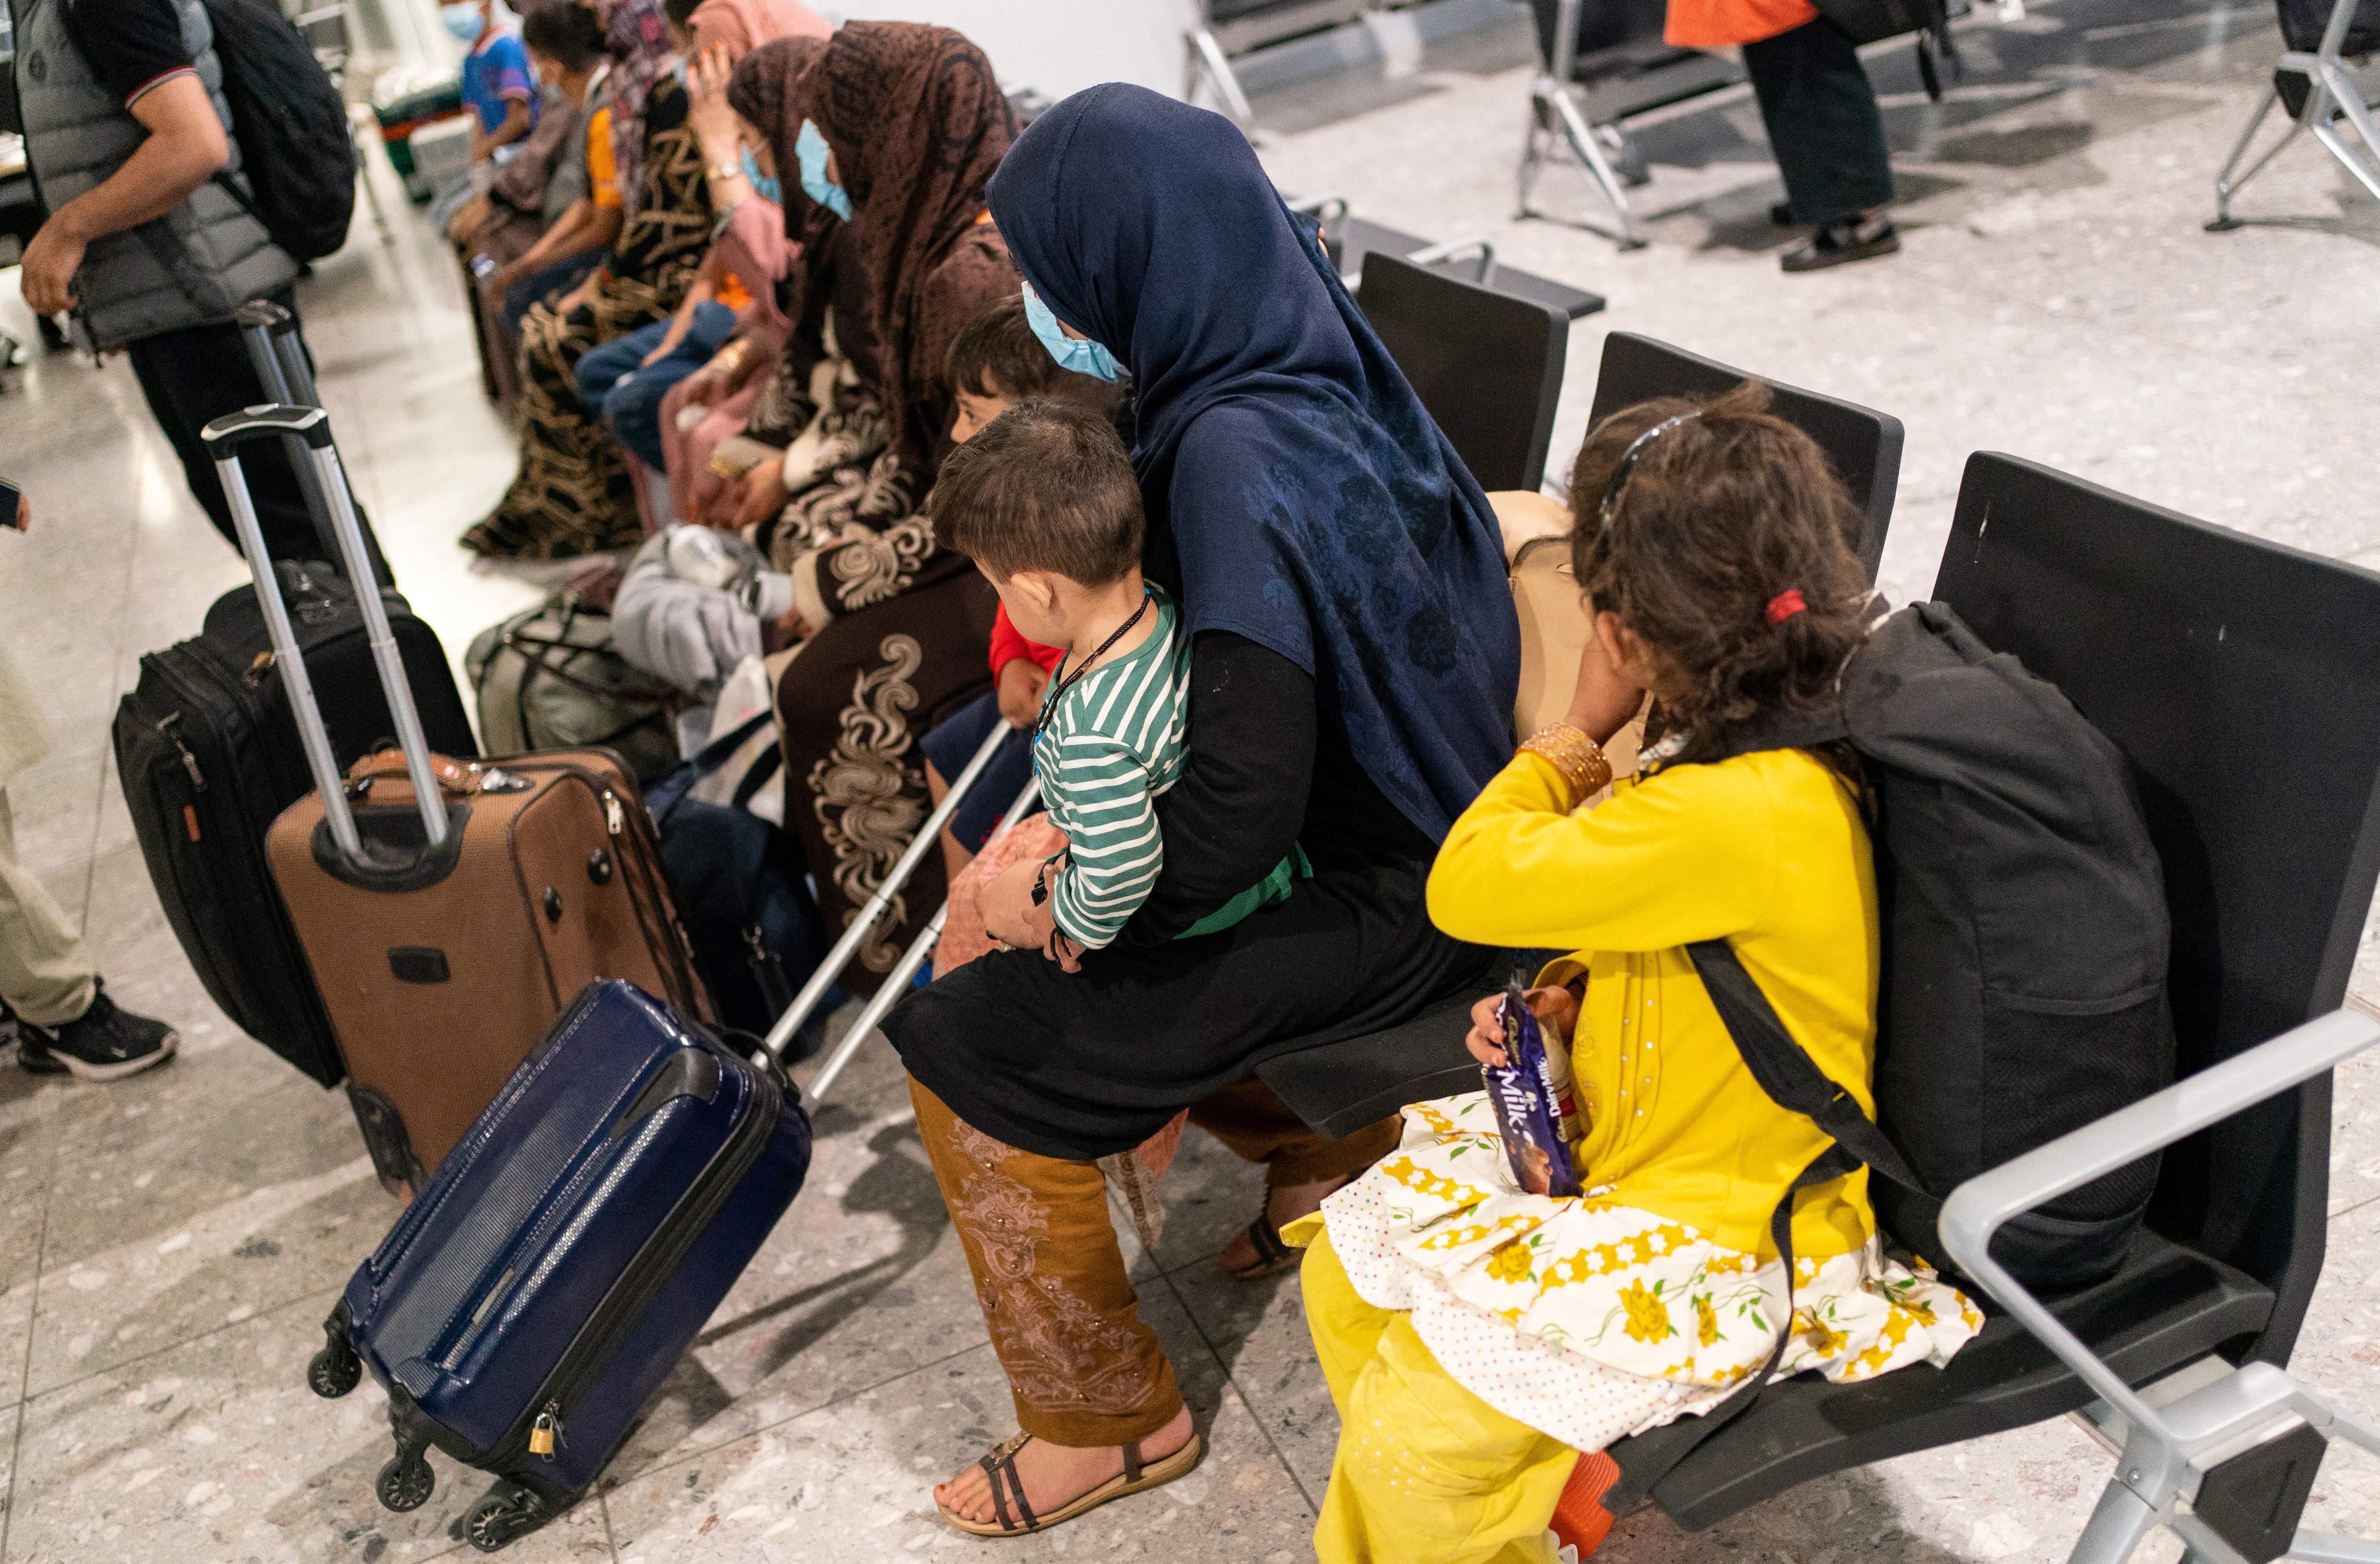 Afghan refugees wait to be processed after arriving at Heathrow airport on an evacuation flight from Afghanistan